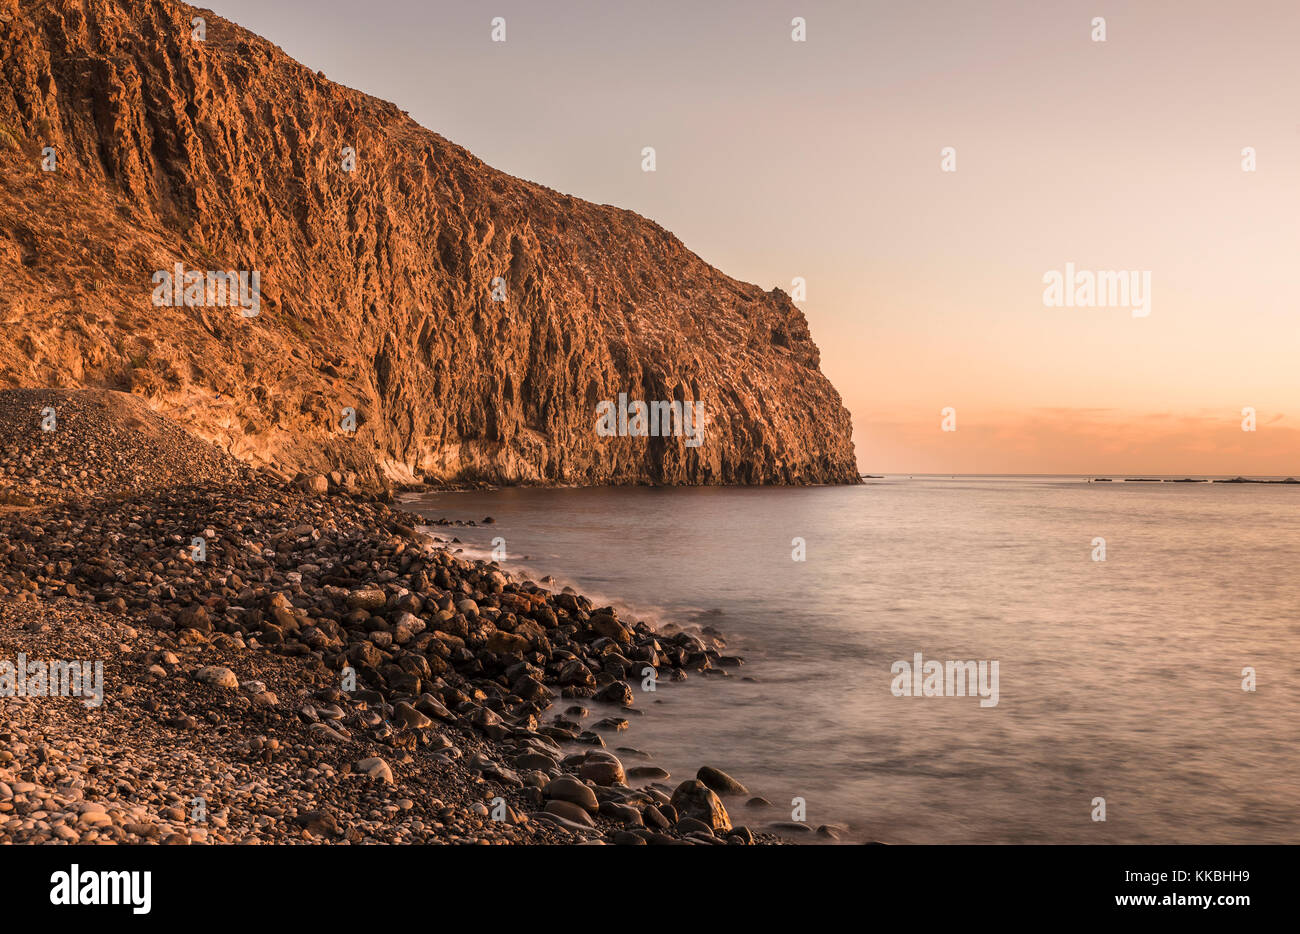 Peaceful evening at sunset on the seafront looking towards the cliffs at the eastern end of Los Cristianos, Tenerife, Canary Islands Stock Photo